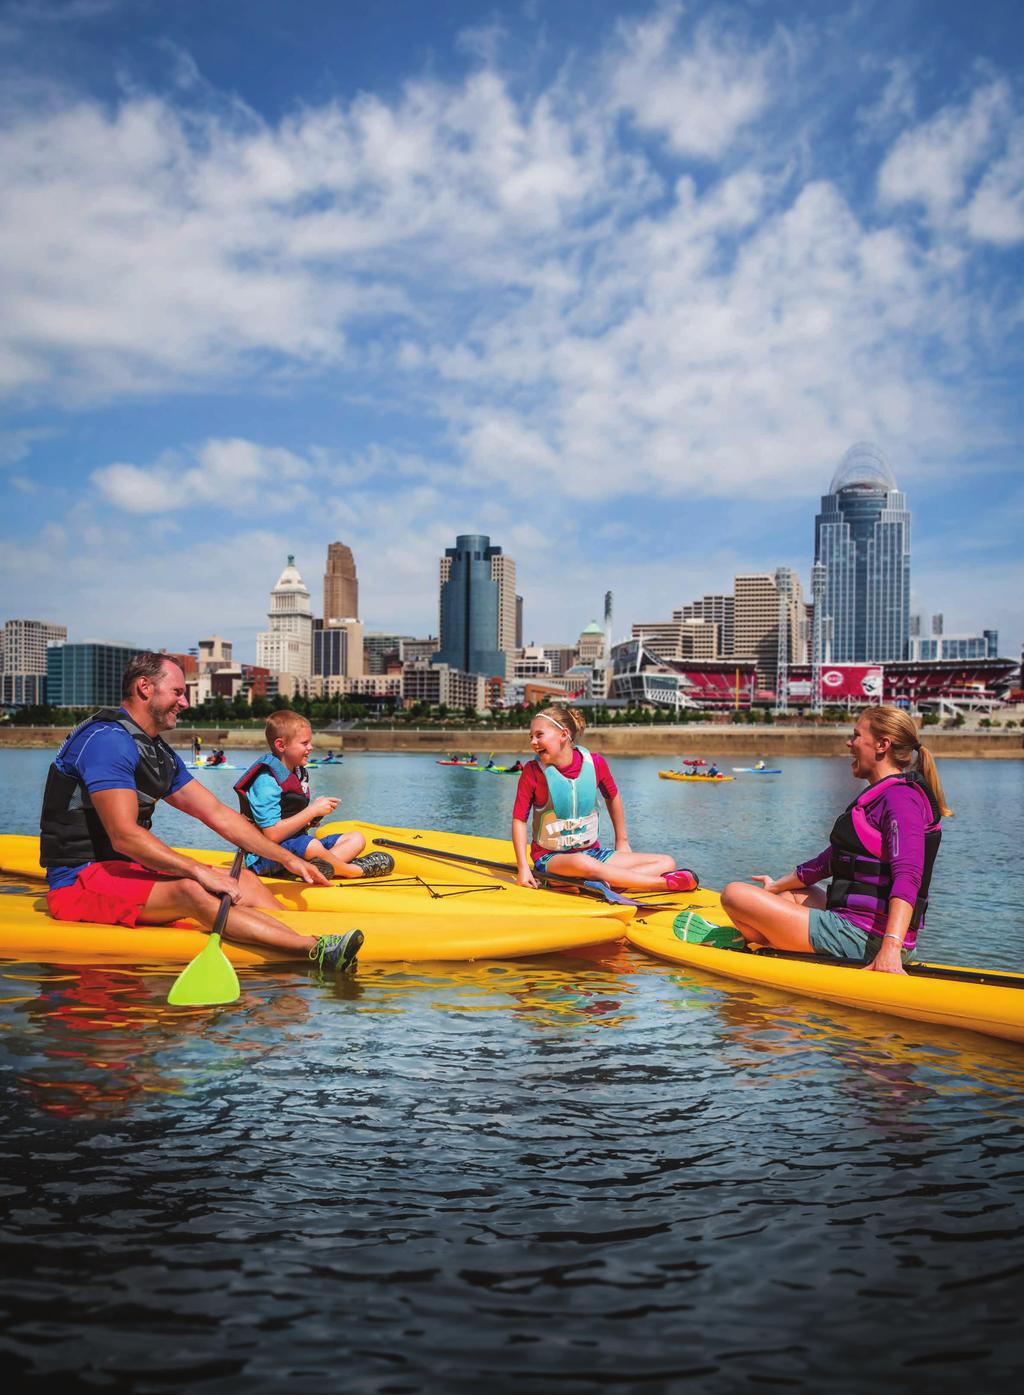 togetherness. Whet your appetite for adventure by joining 1,800 kayakers for one of the biggest river paddle festivals in the country!